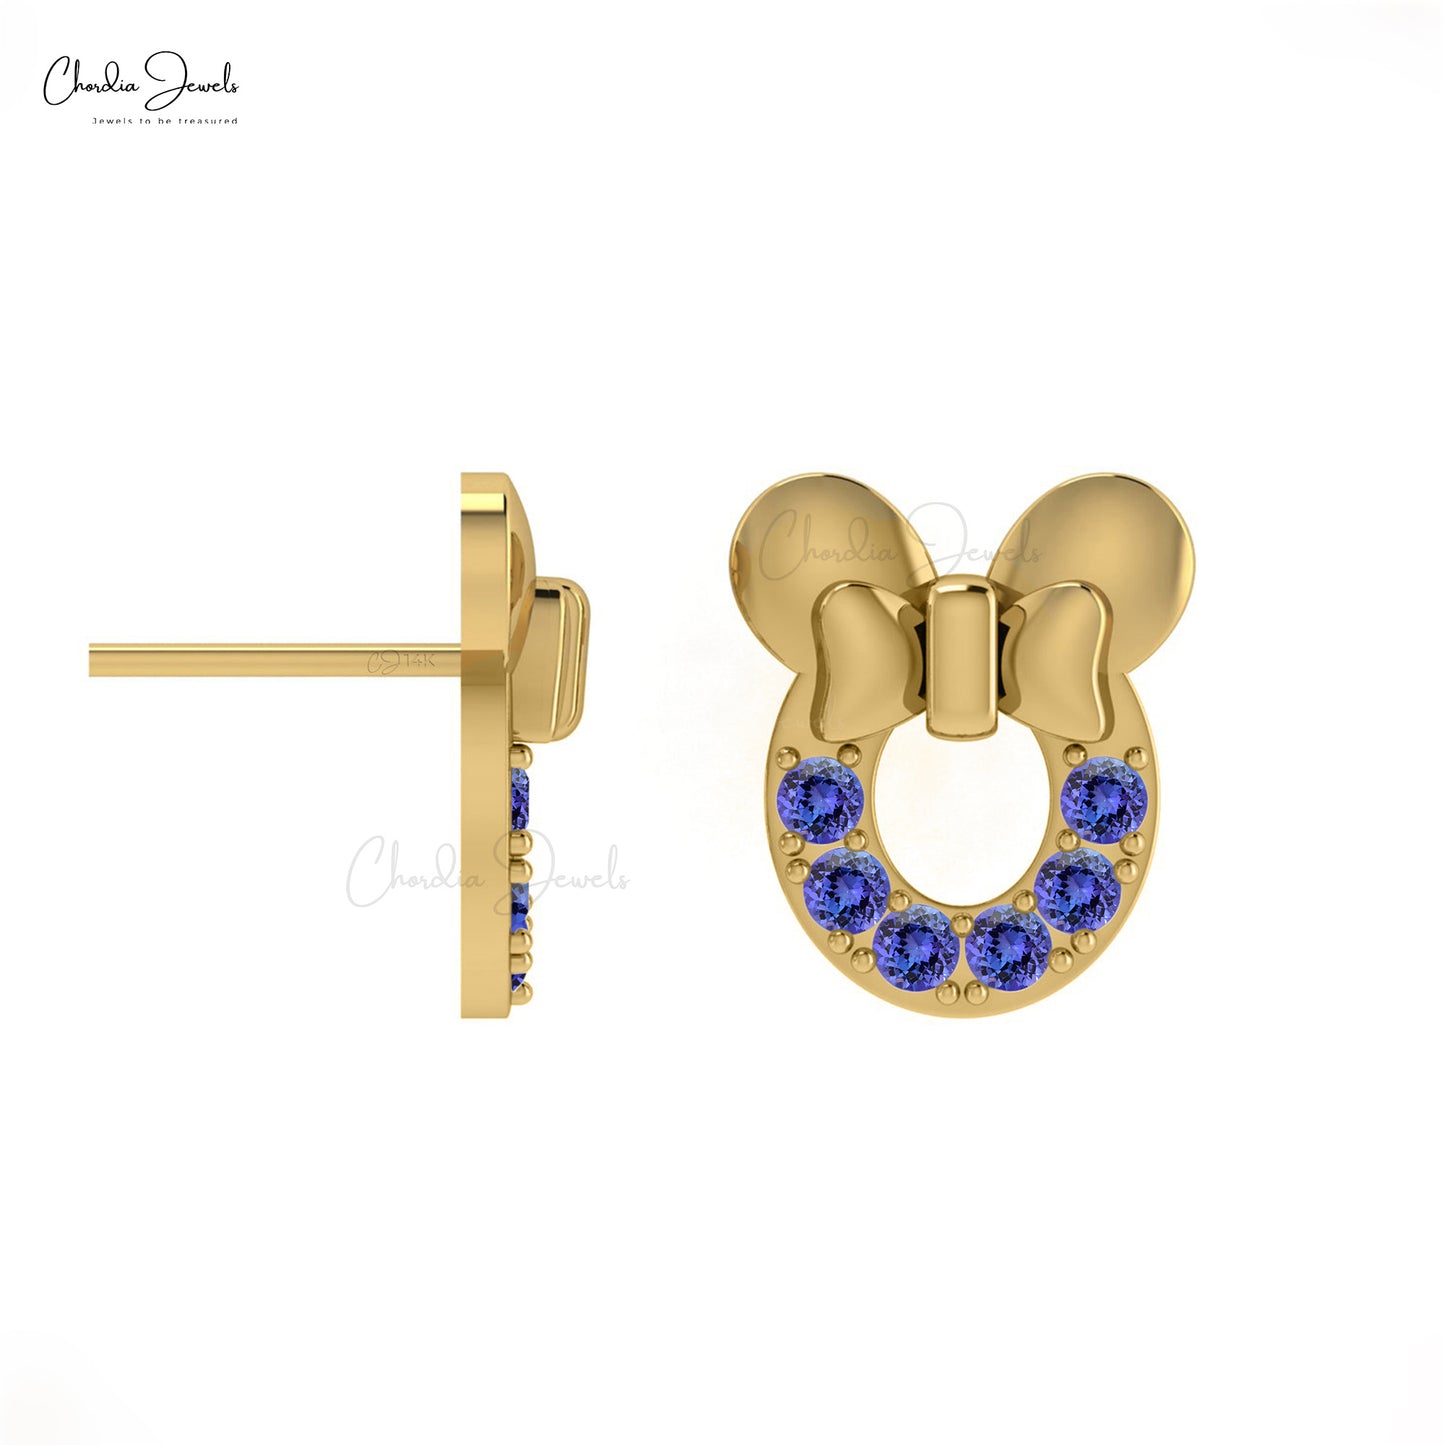 Genuine Tanzanite Mickey Mouse Earrings in 14k Gold Tiny 2mm Round Stone Delicate Earrings